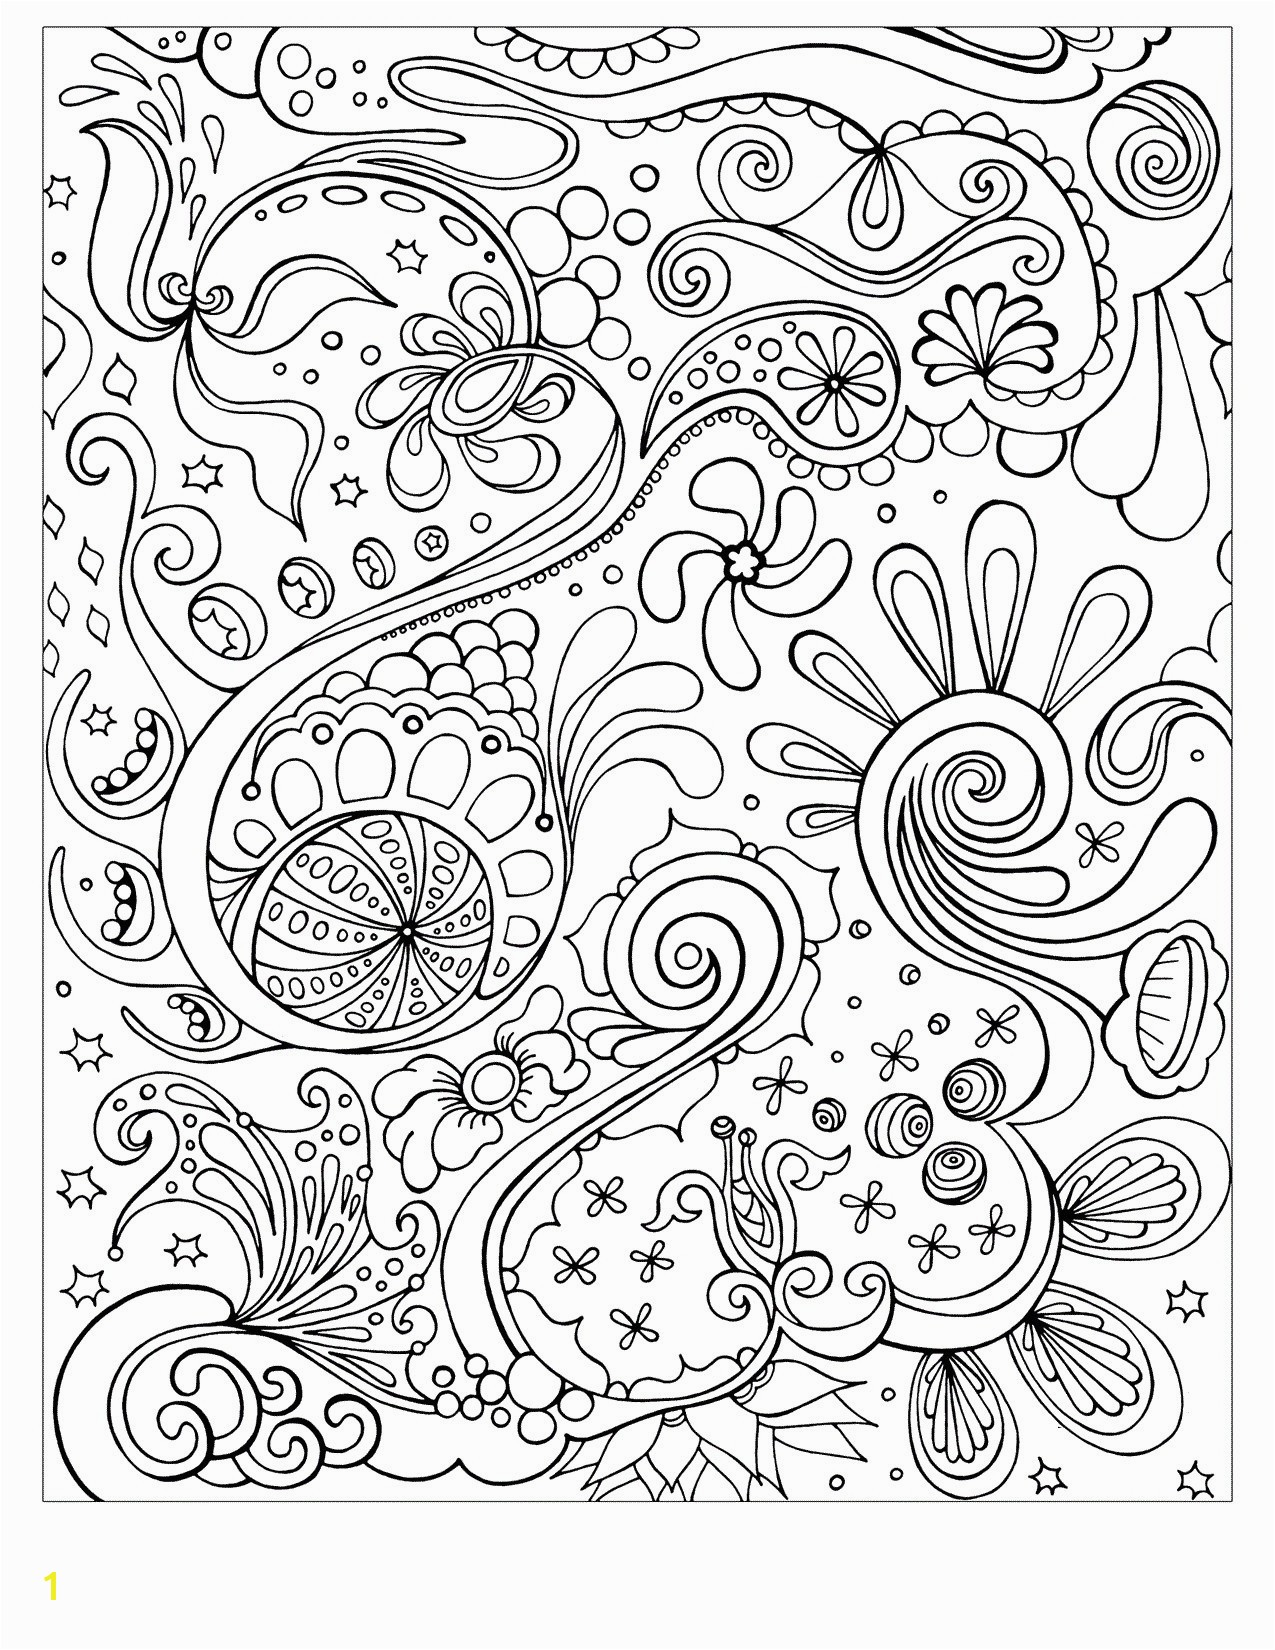 Dental Coloring Pages for Preschool 13 Inspirational Dental Coloring Pages for Preschool Gallery